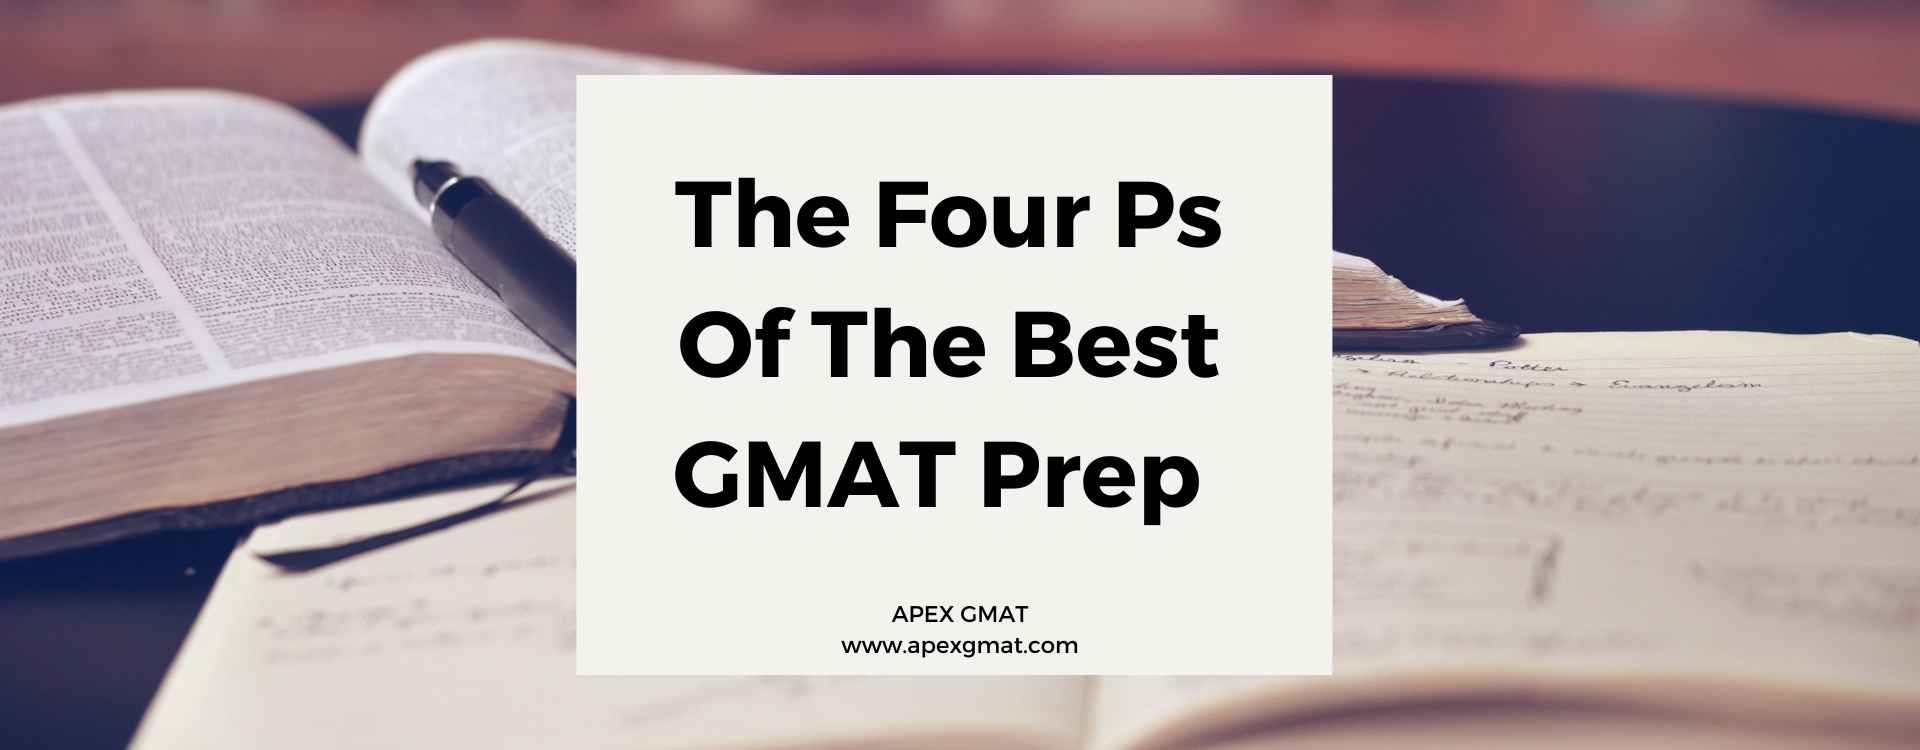 The Four Ps Of The Best GMAT Prep